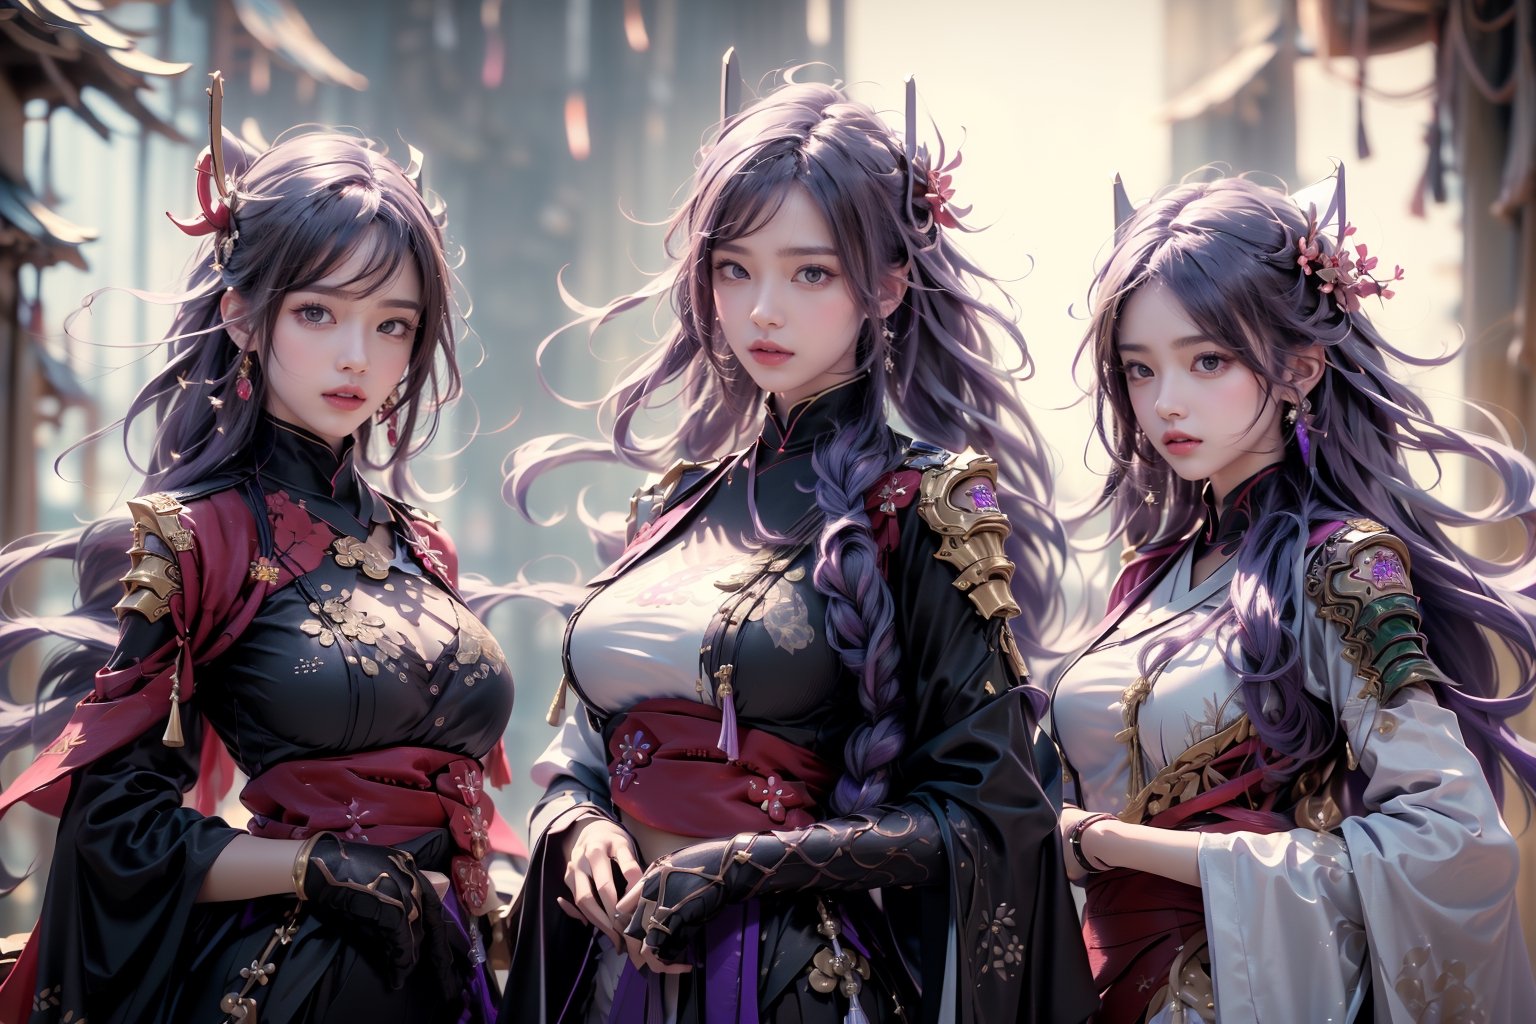 (Masterpiece, highest quality, high resolution, ultra-detailed, 16K, intricate, high contrast, HDR, vibrant color, RAW photo, (photorealistic:1.2), beautiful and aesthetic), cinematic lighting, soft lighting, medium breasts, tall and slim body, group of girls, 3girls, (((Genshin Impact, Raiden Shogun, raidenshogundef, Yae Miko, yaemikodef, Shenhe, shenhedef, long hair, purple hair, pink hair, silver white hair))), glowing hair, looking at the viewer, temple, torii, bonsai forest, evening, neon lights, futuristic, elegant, glowing, mysterious, meditation, magical, mystical, raging sun, eclipse, cosmic, space, galaxy, portal, scenic, landscape, iconic, cyberpunk, scifi, neon background, midjourney, GdClth, full body shot, samurai, dual wield, katanas